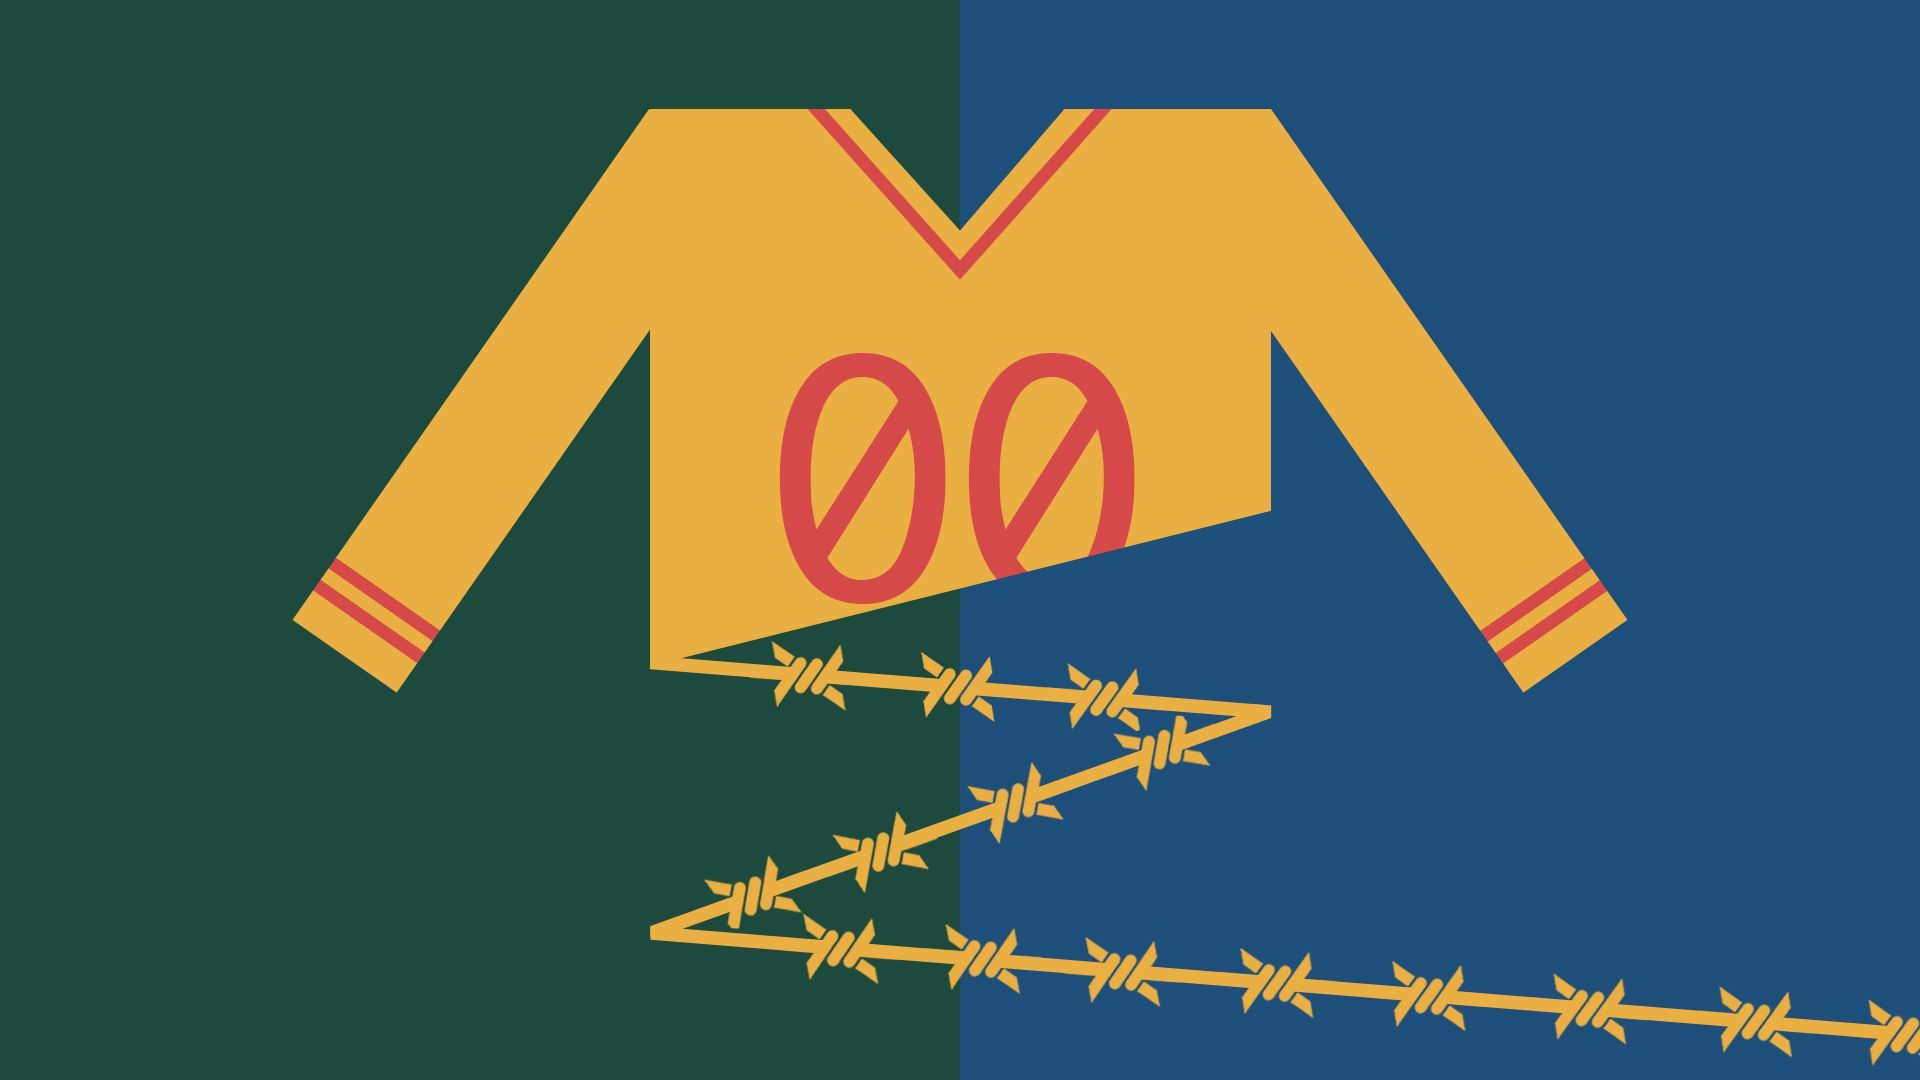 Illustration of a thread coming off a uniform made out of barbed wire